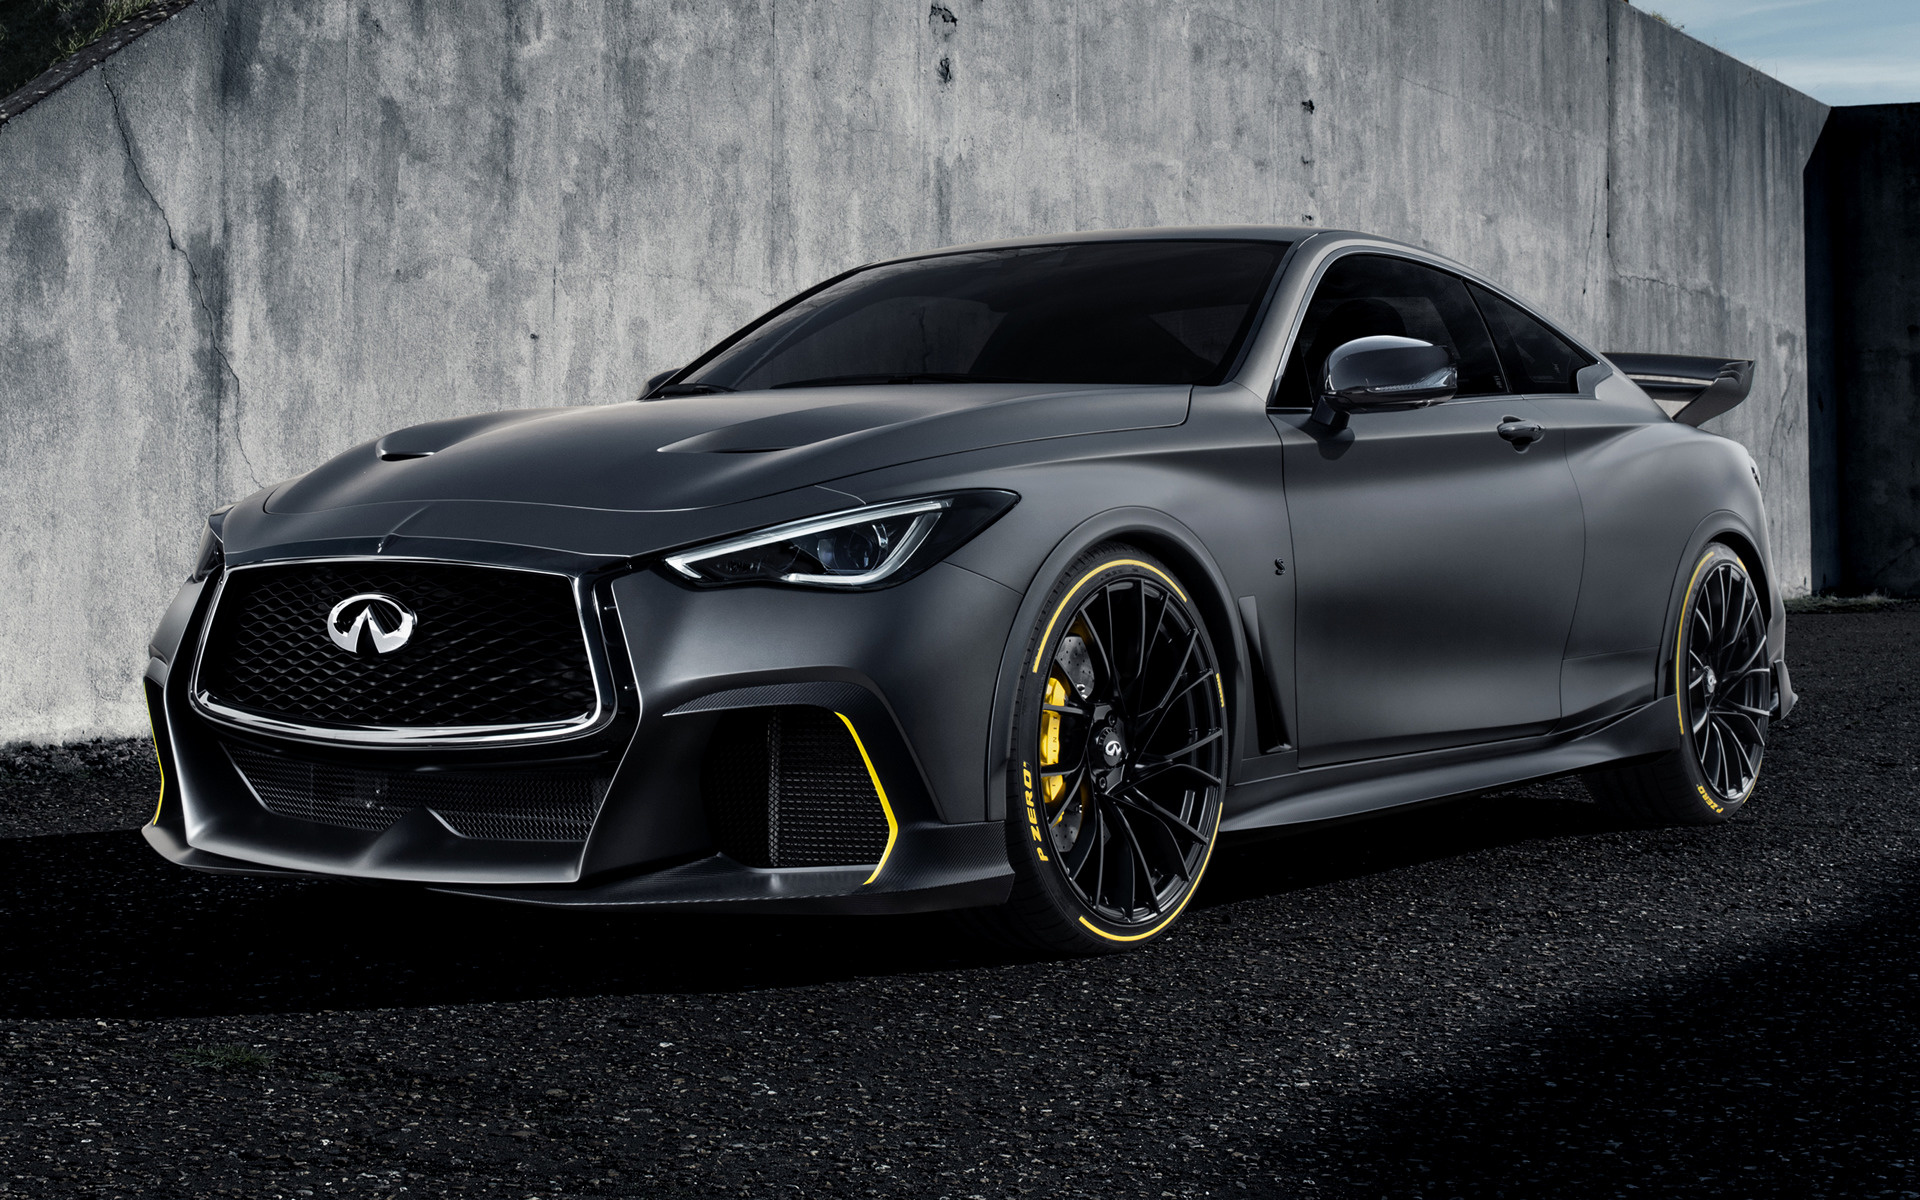 2018 Infiniti Project Black S Prototype - Wallpapers and HD Images